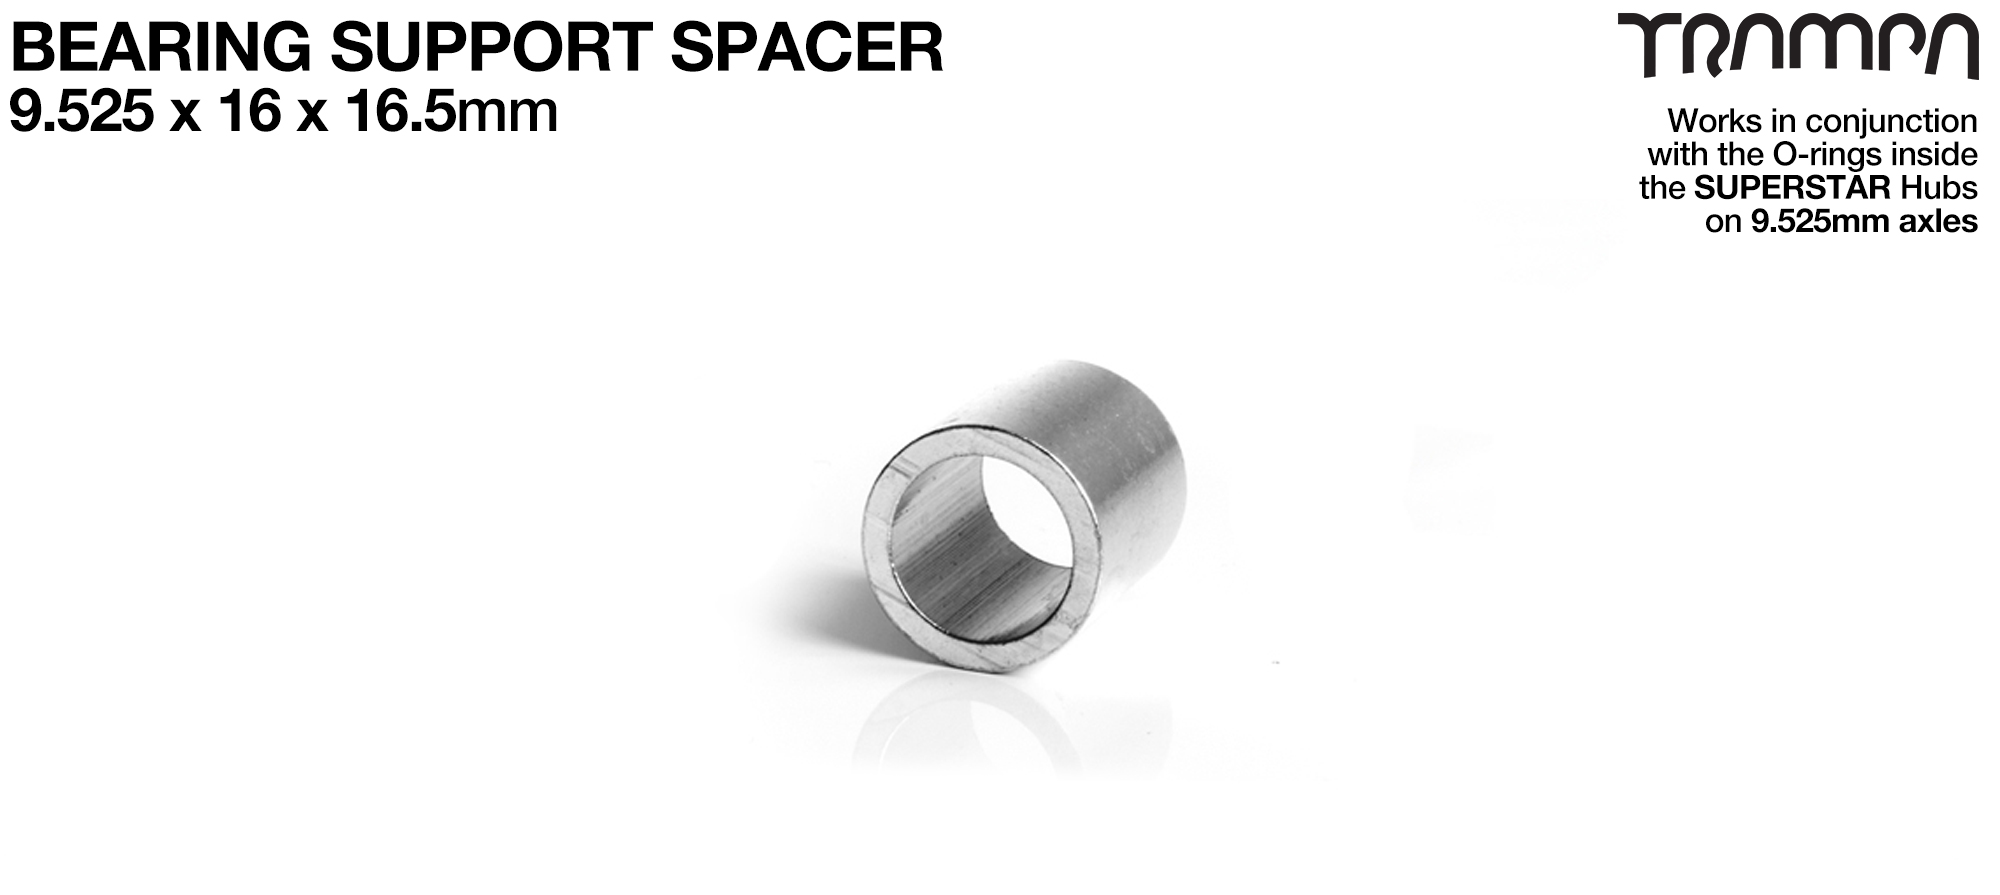 Internal Bearing support spacer used with 8mm O-Ring on 9.525mm axles - 9.525 x 13.525 x 16.5mm